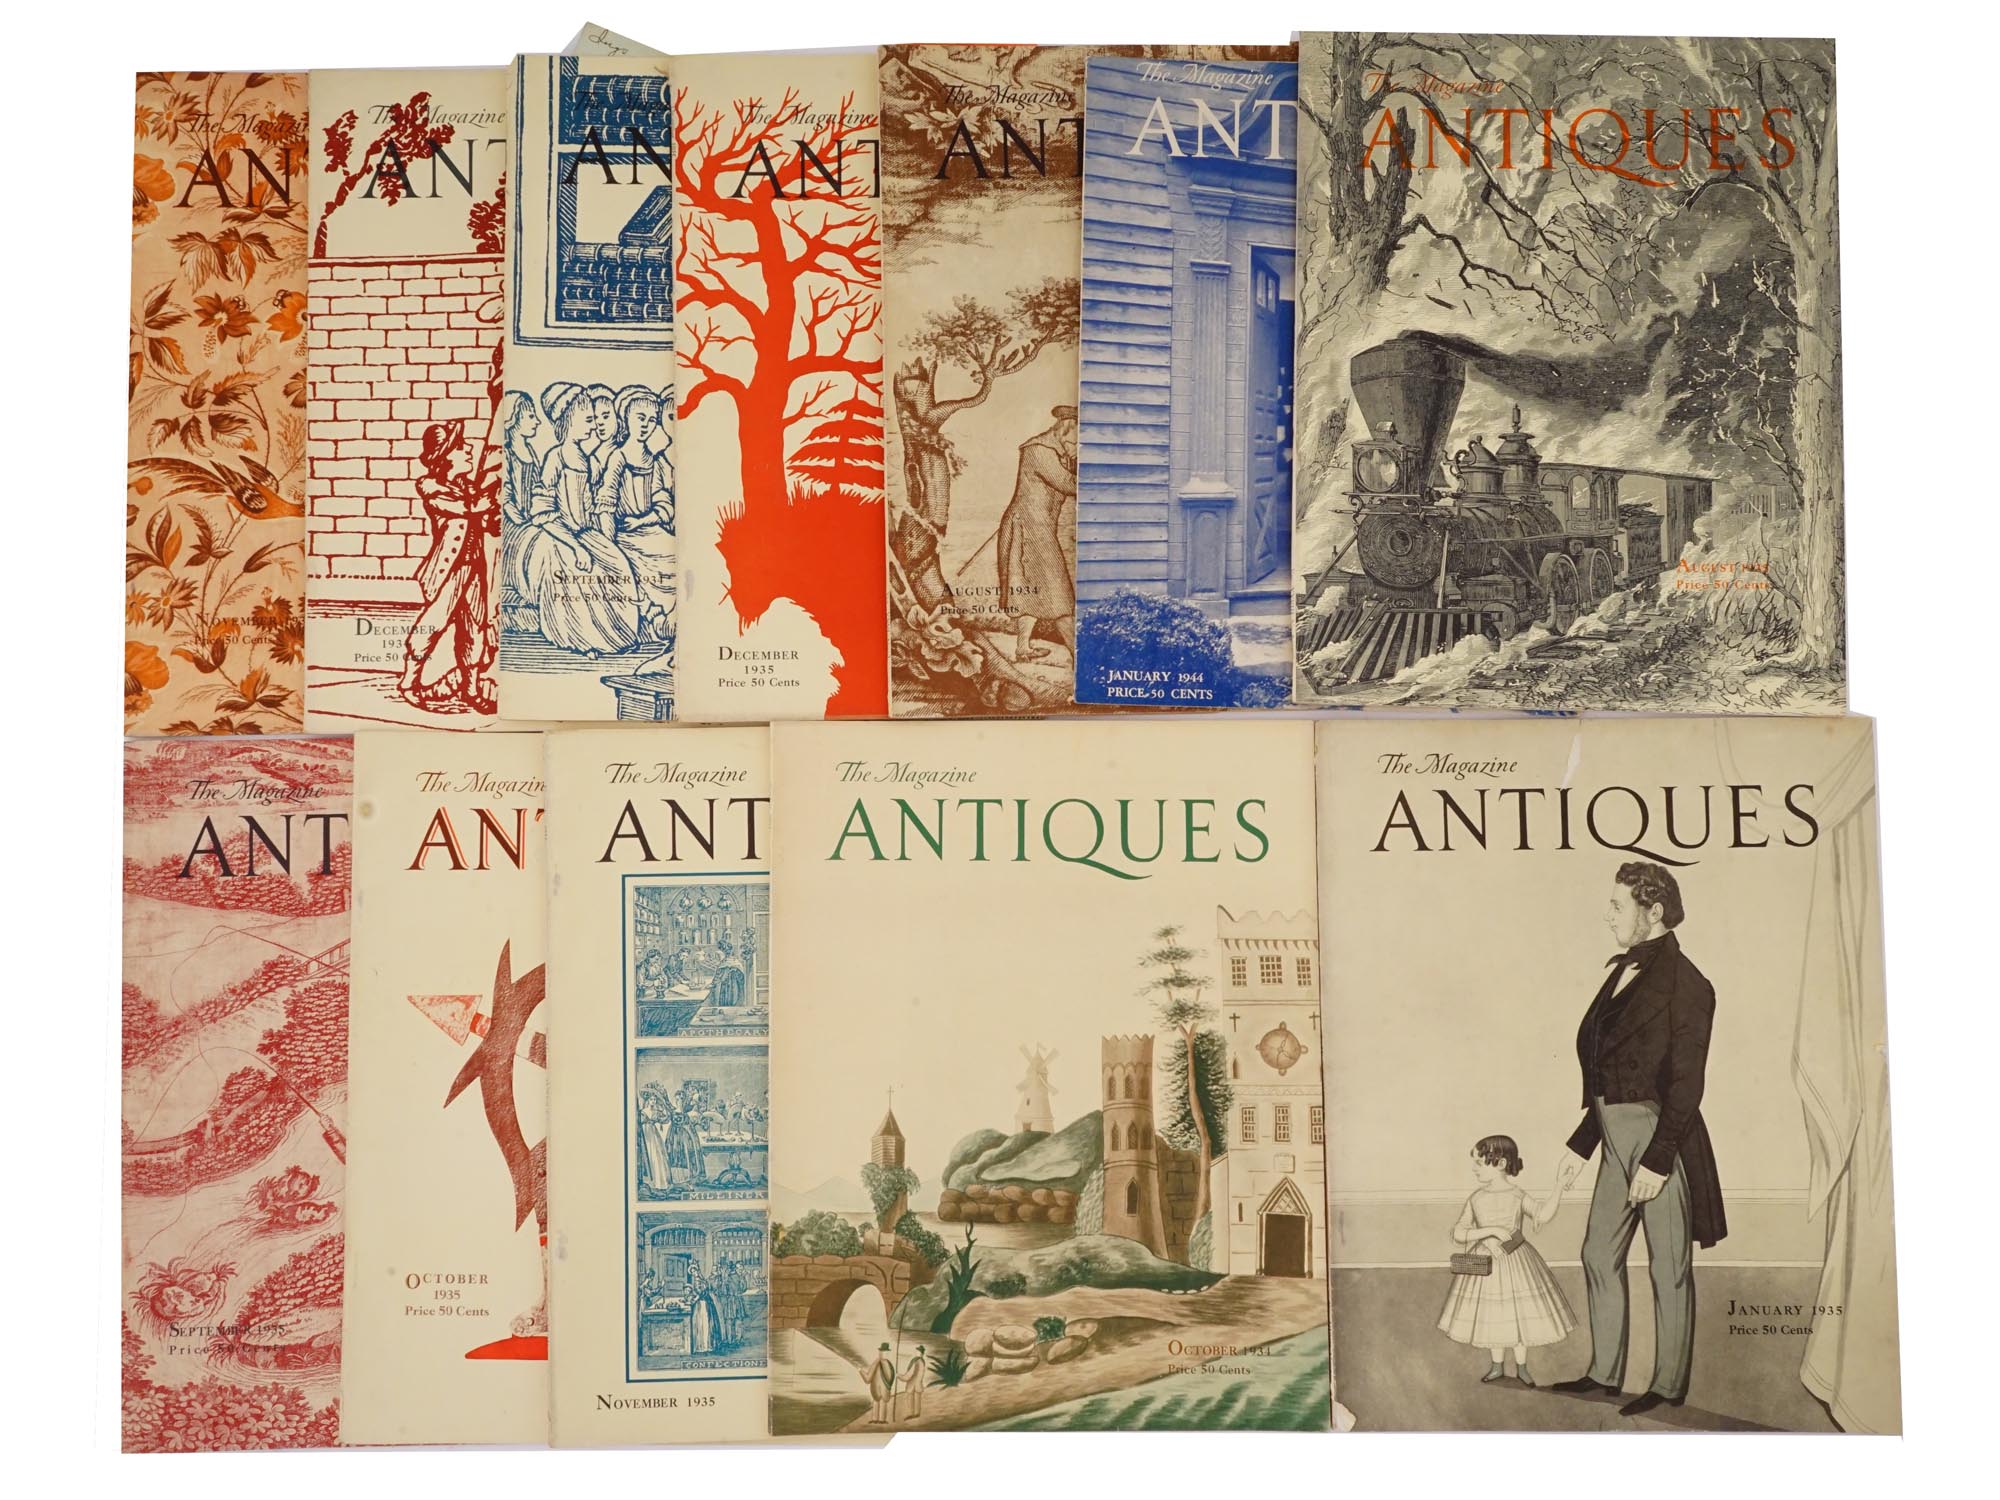 COLLECTION OF 1930S THE MAGAZINE ANTIQUES ISSUES PIC-0